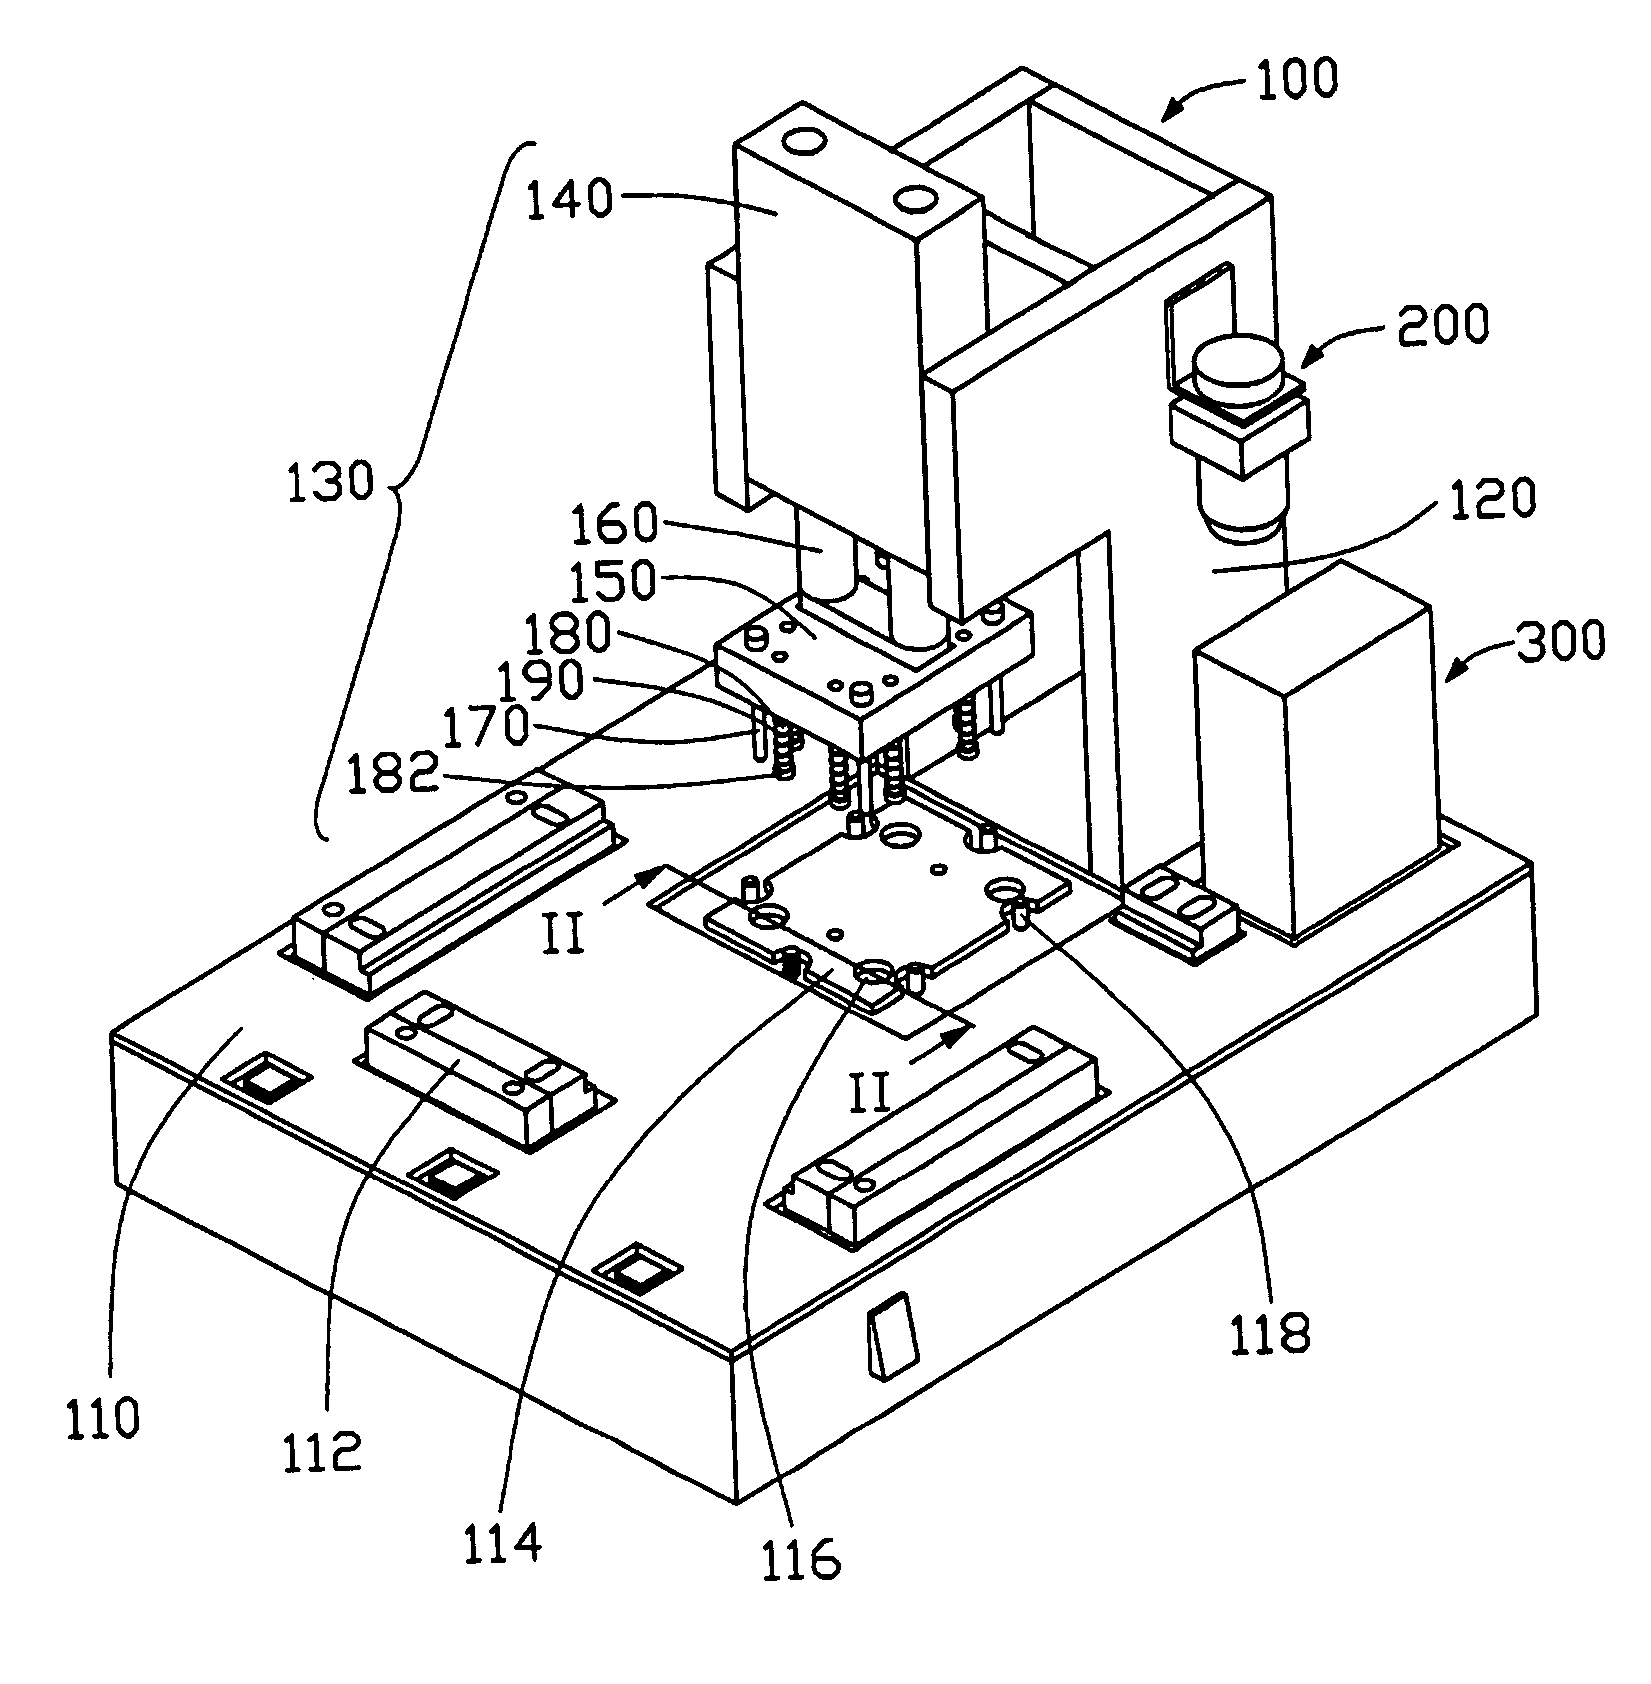 Stamping machine for mounting retention frame of heat sink to motherboard